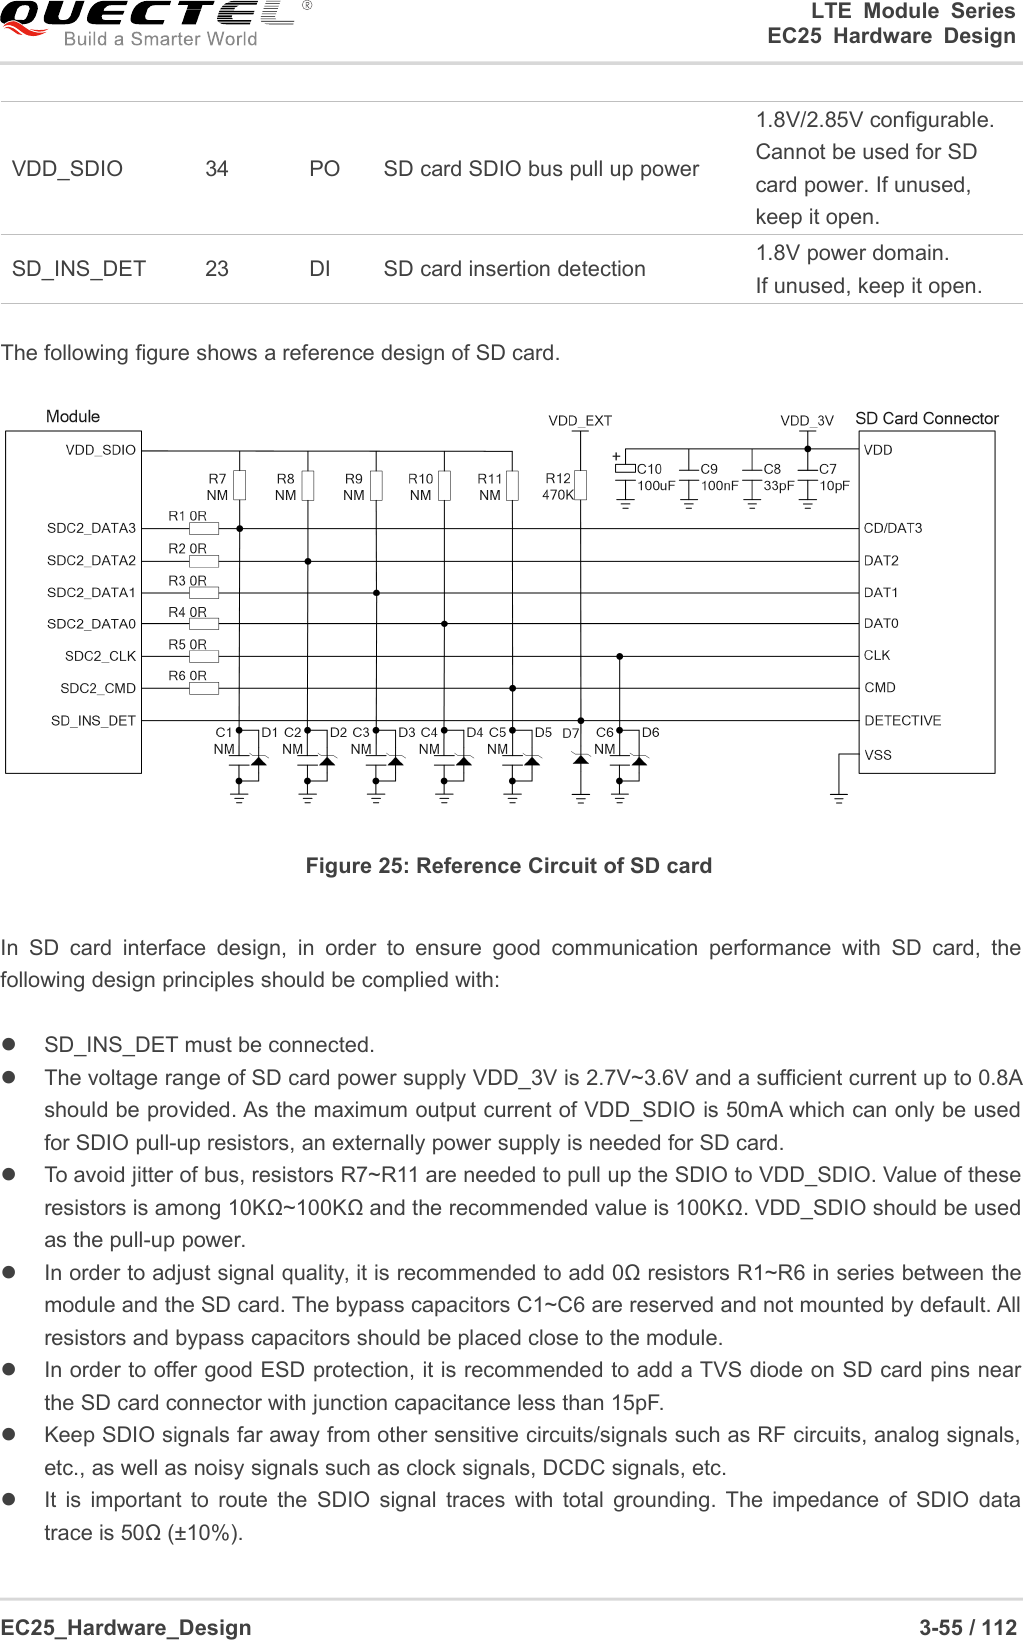 LTE Module SeriesEC25 Hardware DesignEC25_Hardware_Design 3-55 / 112The following figure shows a reference design of SD card.Figure 25: Reference Circuit of SD cardIn SD card interface design, in order to ensure good communication performance with SD card, thefollowing design principles should be complied with:SD_INS_DET must be connected.The voltage range of SD card power supply VDD_3V is 2.7V~3.6V and a sufficient current up to 0.8Ashould be provided. As the maximum output current of VDD_SDIO is 50mA which can only be usedfor SDIO pull-up resistors, an externally power supply is needed for SD card.To avoid jitter of bus, resistors R7~R11 are needed to pull up the SDIO to VDD_SDIO. Value of theseresistors is among 10KΩ~100KΩ and the recommended value is 100KΩ. VDD_SDIO should be usedas the pull-up power.In order to adjust signal quality, it is recommended to add 0Ω resistors R1~R6 in series between themodule and the SD card. The bypass capacitors C1~C6 are reserved and not mounted by default. Allresistors and bypass capacitors should be placed close to the module.In order to offer good ESD protection, it is recommended to add a TVS diode on SD card pins nearthe SD card connector with junction capacitance less than 15pF.Keep SDIO signals far away from other sensitive circuits/signals such as RF circuits, analog signals,etc., as well as noisy signals such as clock signals, DCDC signals, etc.It is important to route the SDIO signal traces with total grounding. The impedance of SDIO datatrace is 50Ω (±10%).VDD_SDIO34POSD card SDIO bus pull up power1.8V/2.85V configurable.Cannot be used for SDcard power. If unused,keep it open.SD_INS_DET23DISD card insertion detection1.8V power domain.If unused, keep it open.